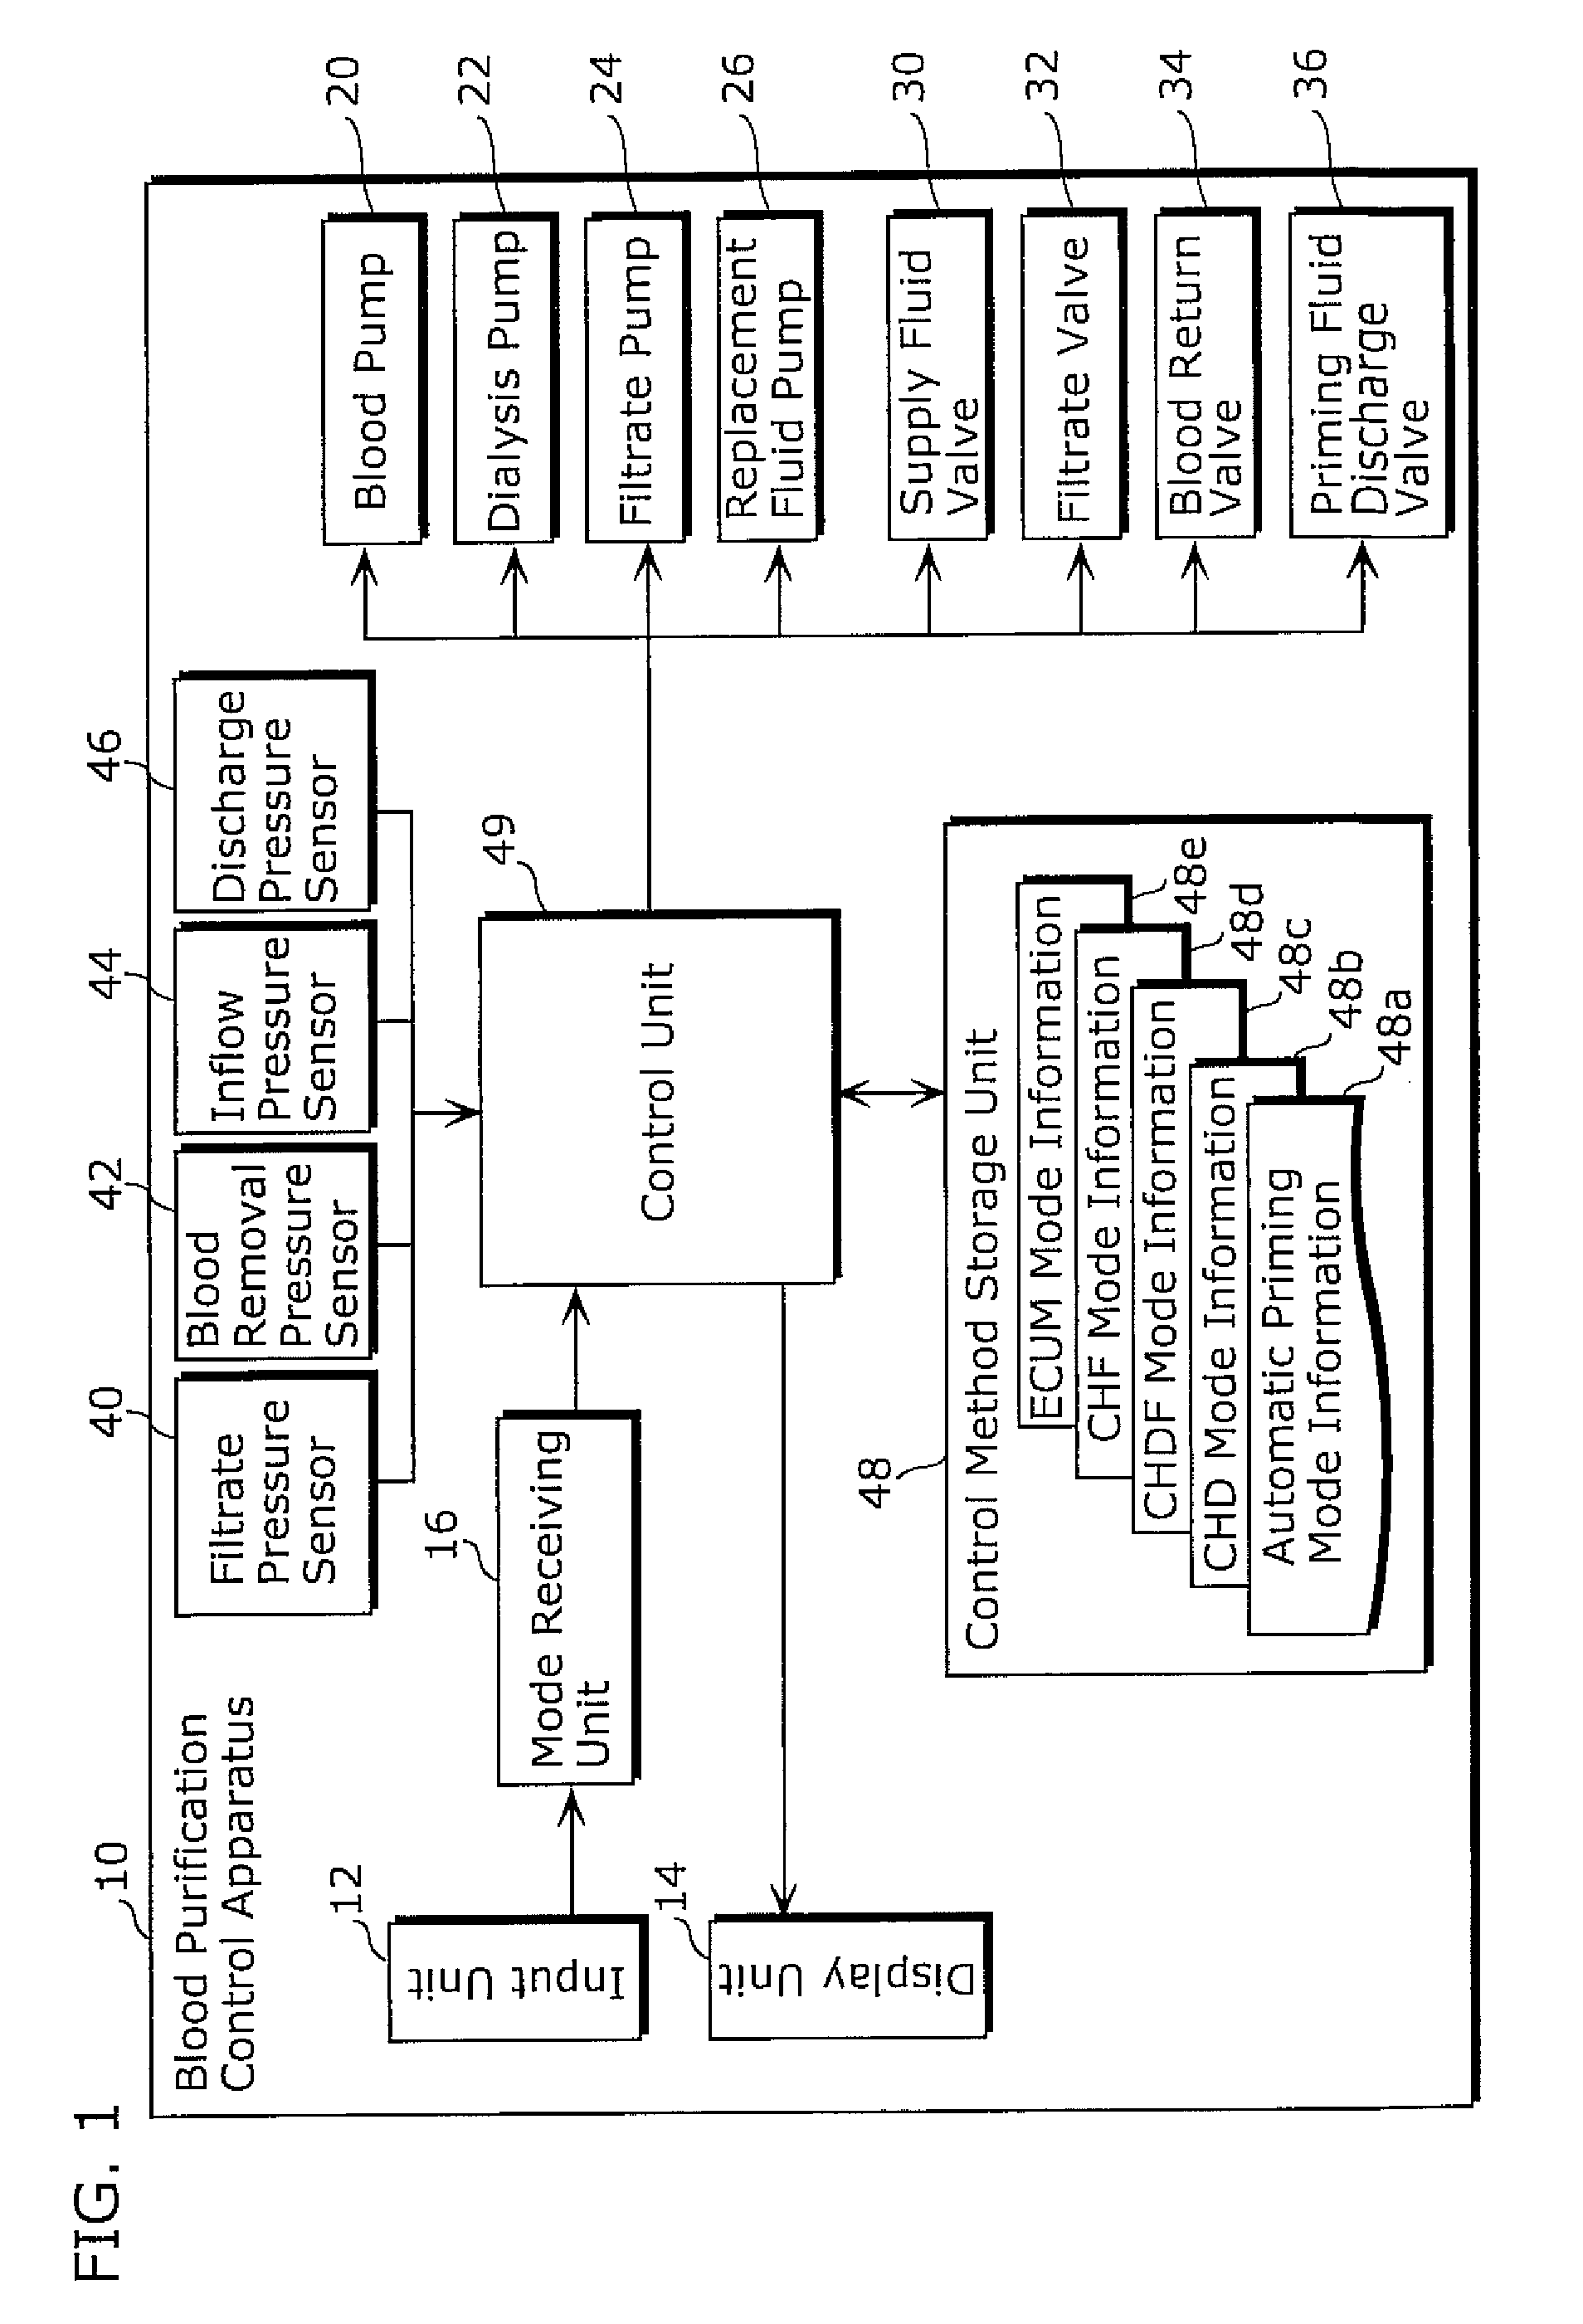 Blood circuit, blood purification control apparatus, and priming method